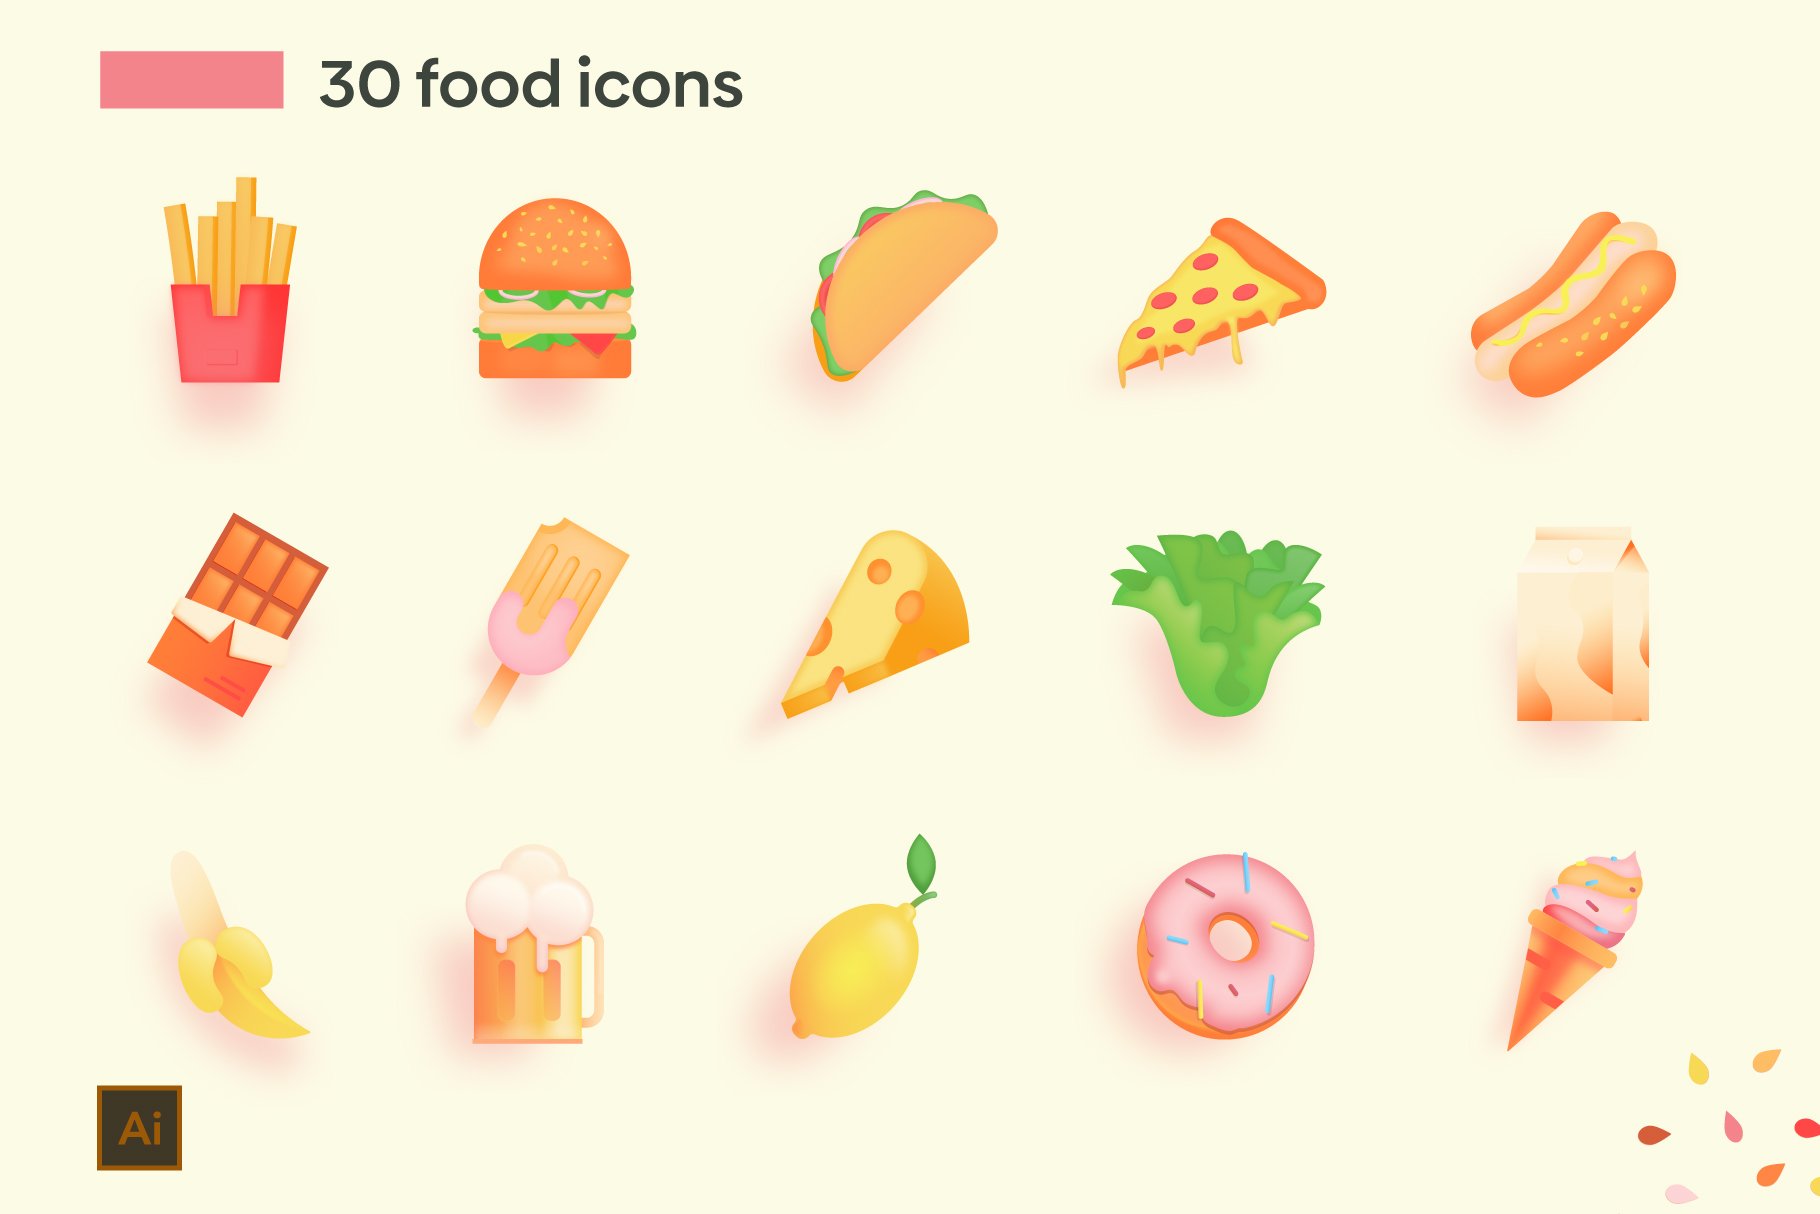 Food Icons cover image.